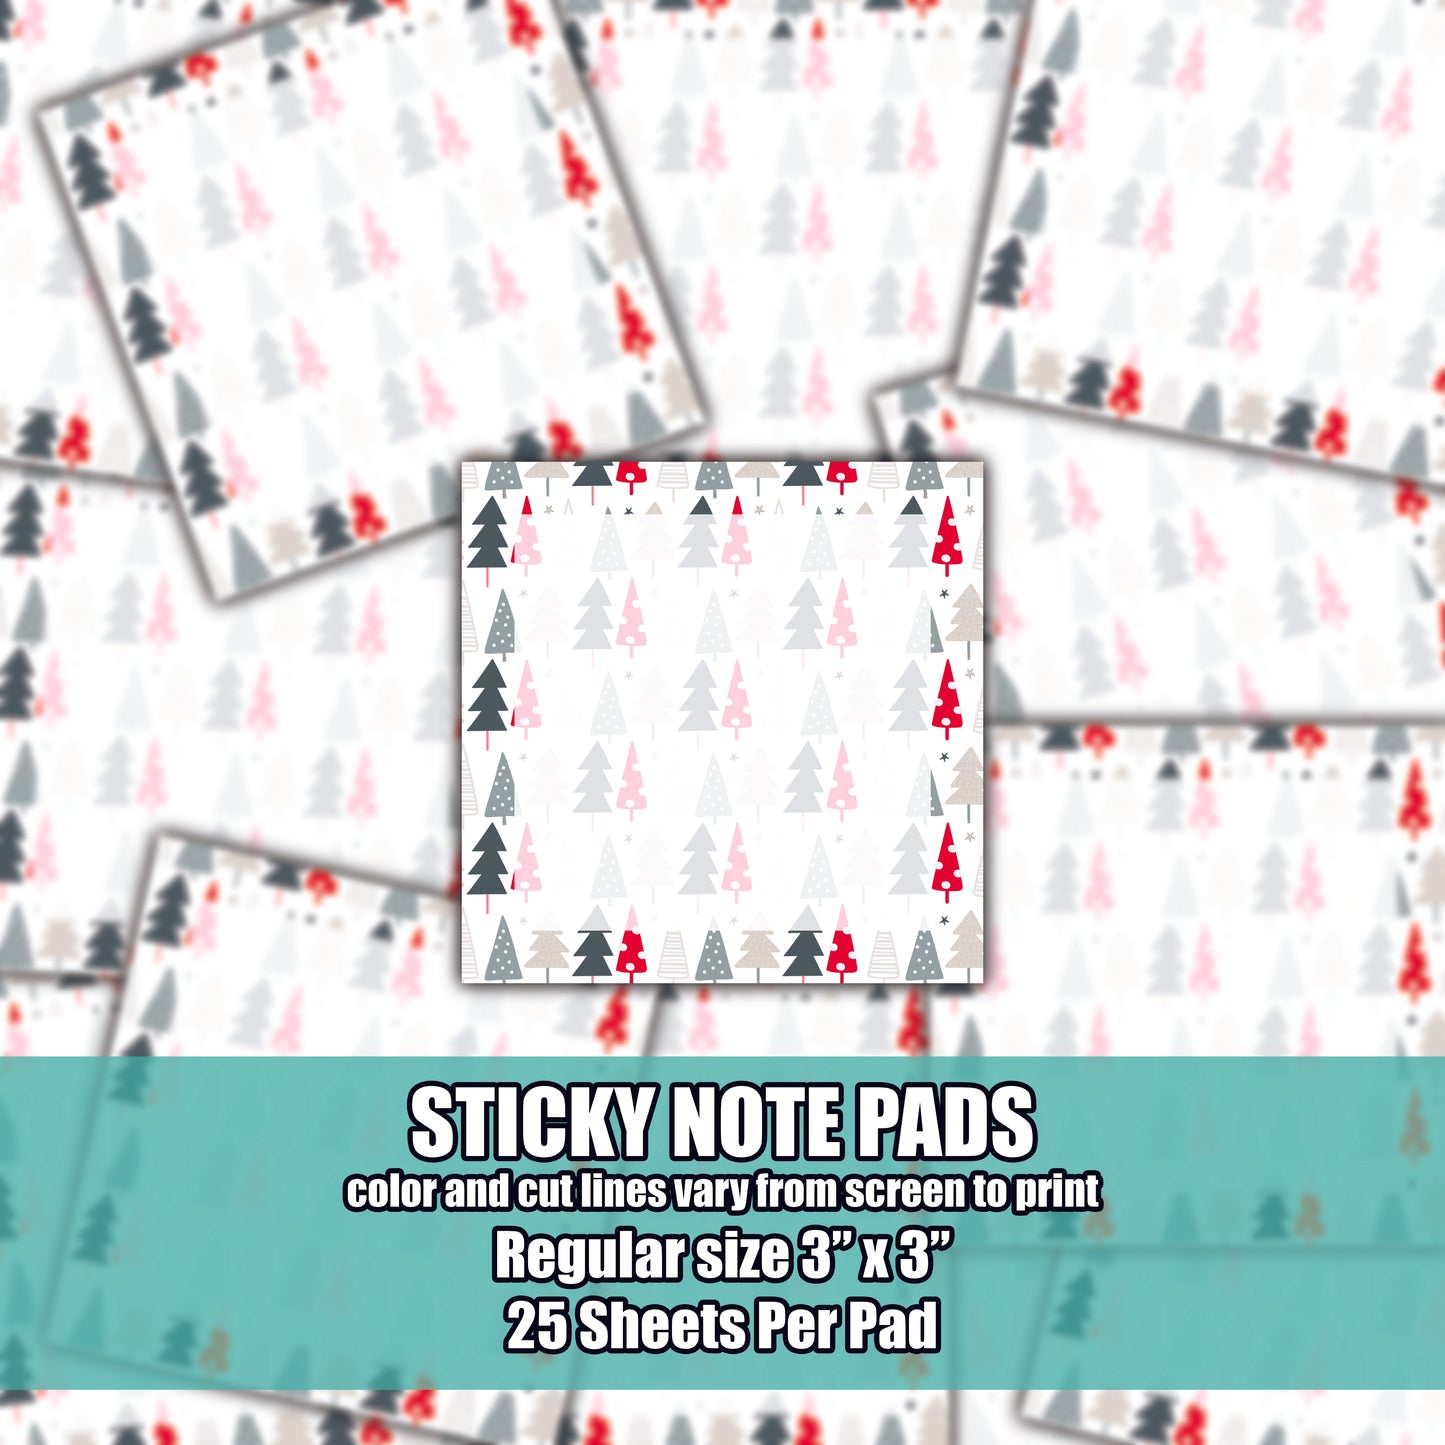 STICKY NOTE PAD - CHRISTMAS TREES